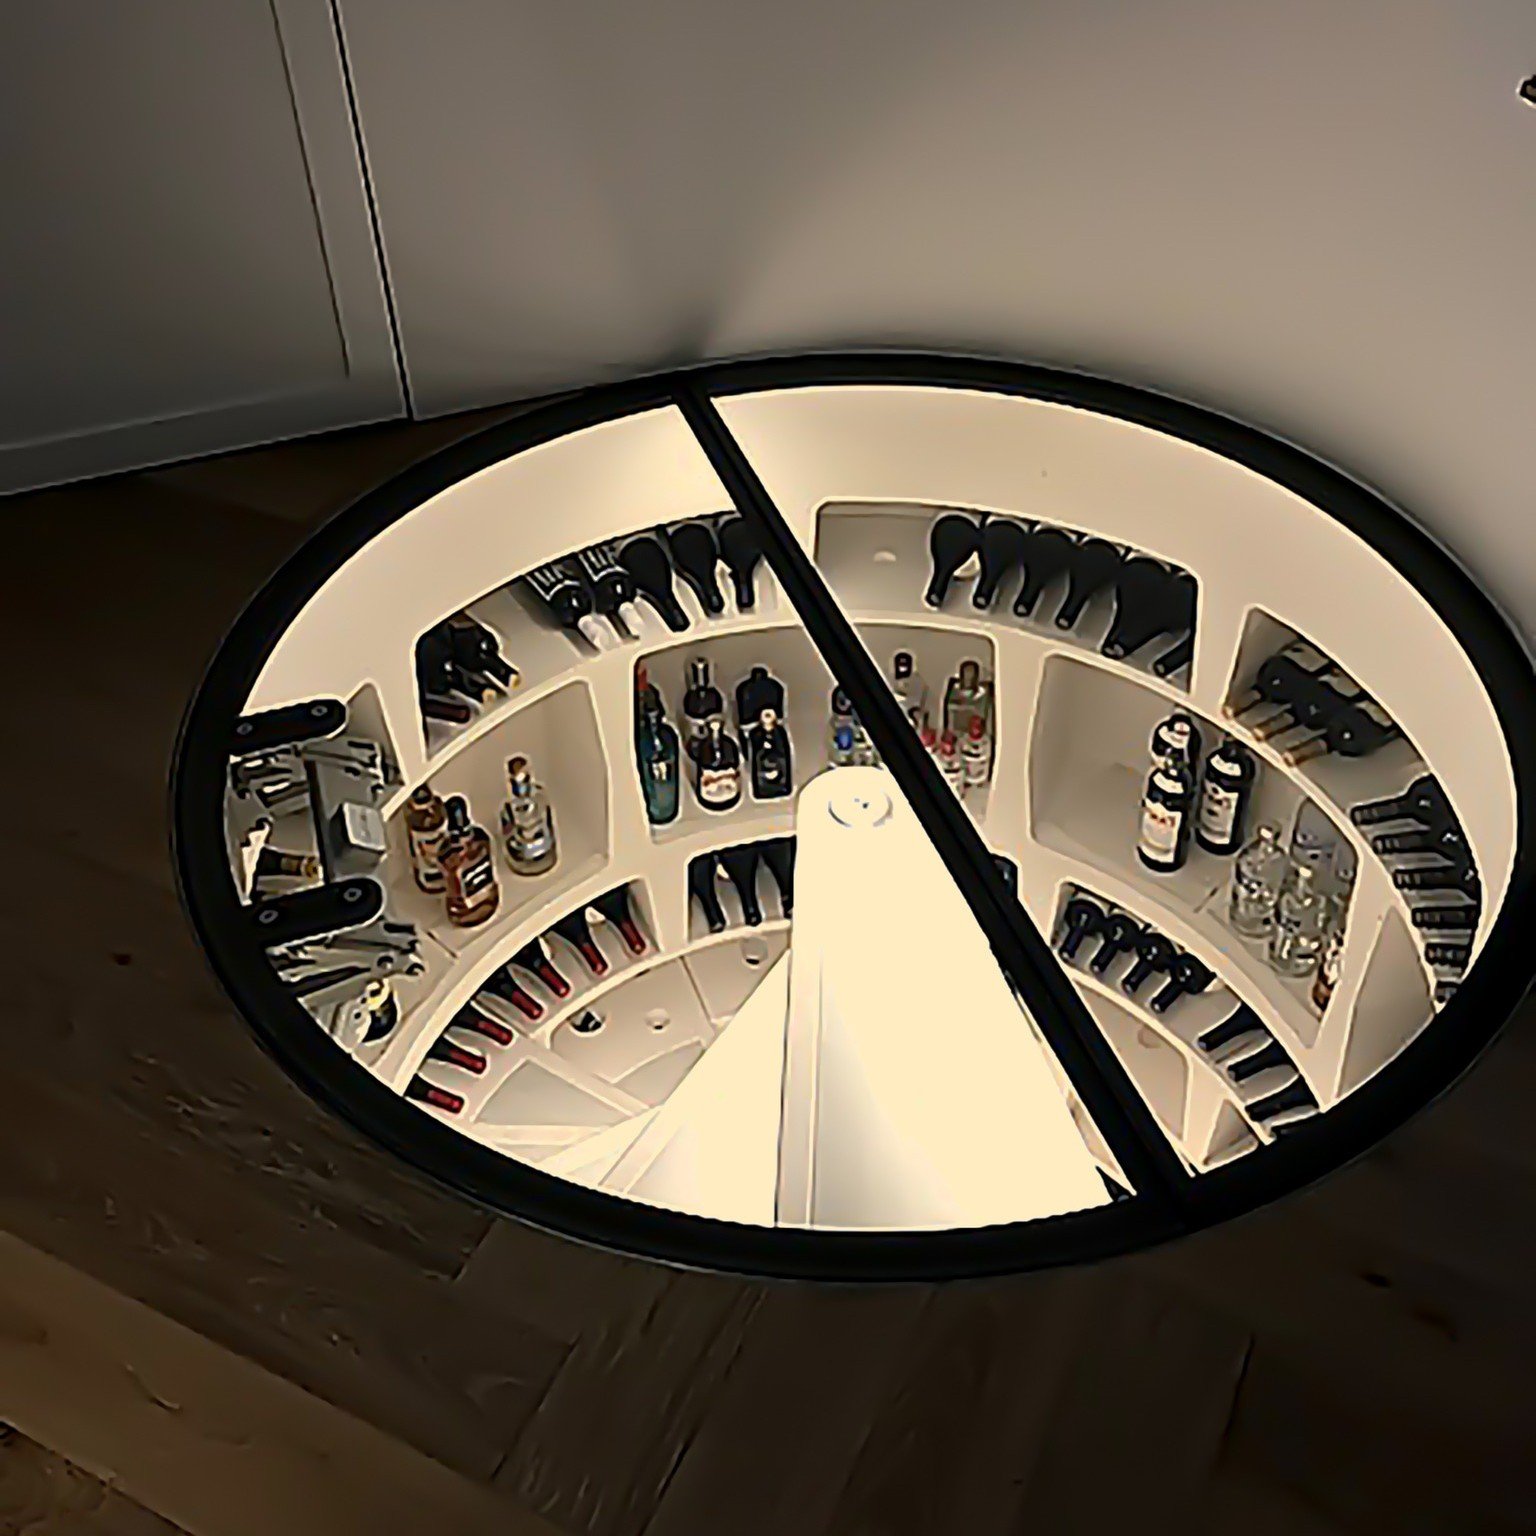 Do you need space for your spirits as well as your wine? It is now possible to get room for both with a Spiral Cellar 😍

Contact us today to learn more
https://en.spiralcellarsscandinavia.com/kontakt